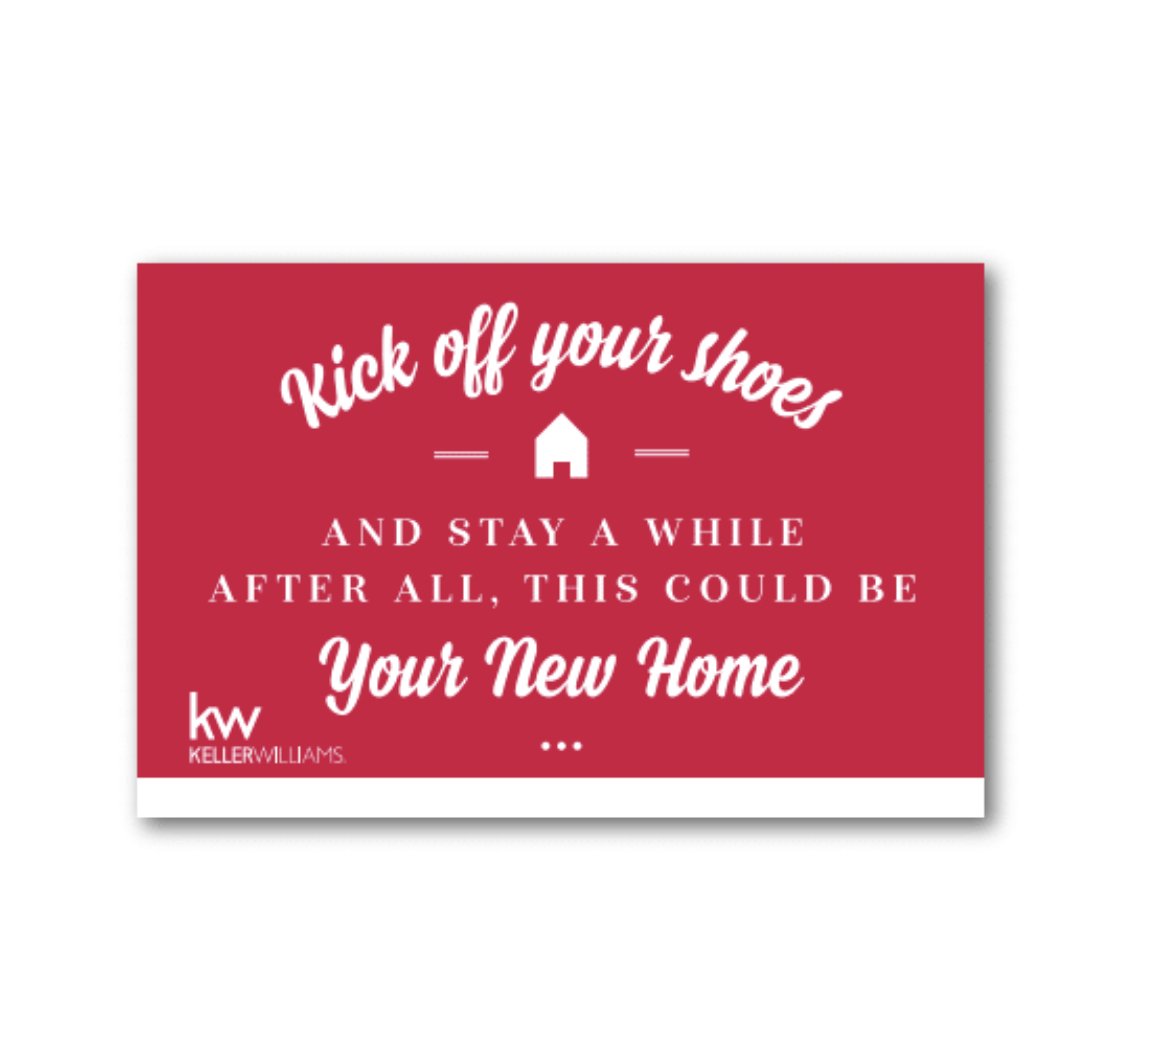 Keller Williams Shoe Sign - Red - All Things Real Estate